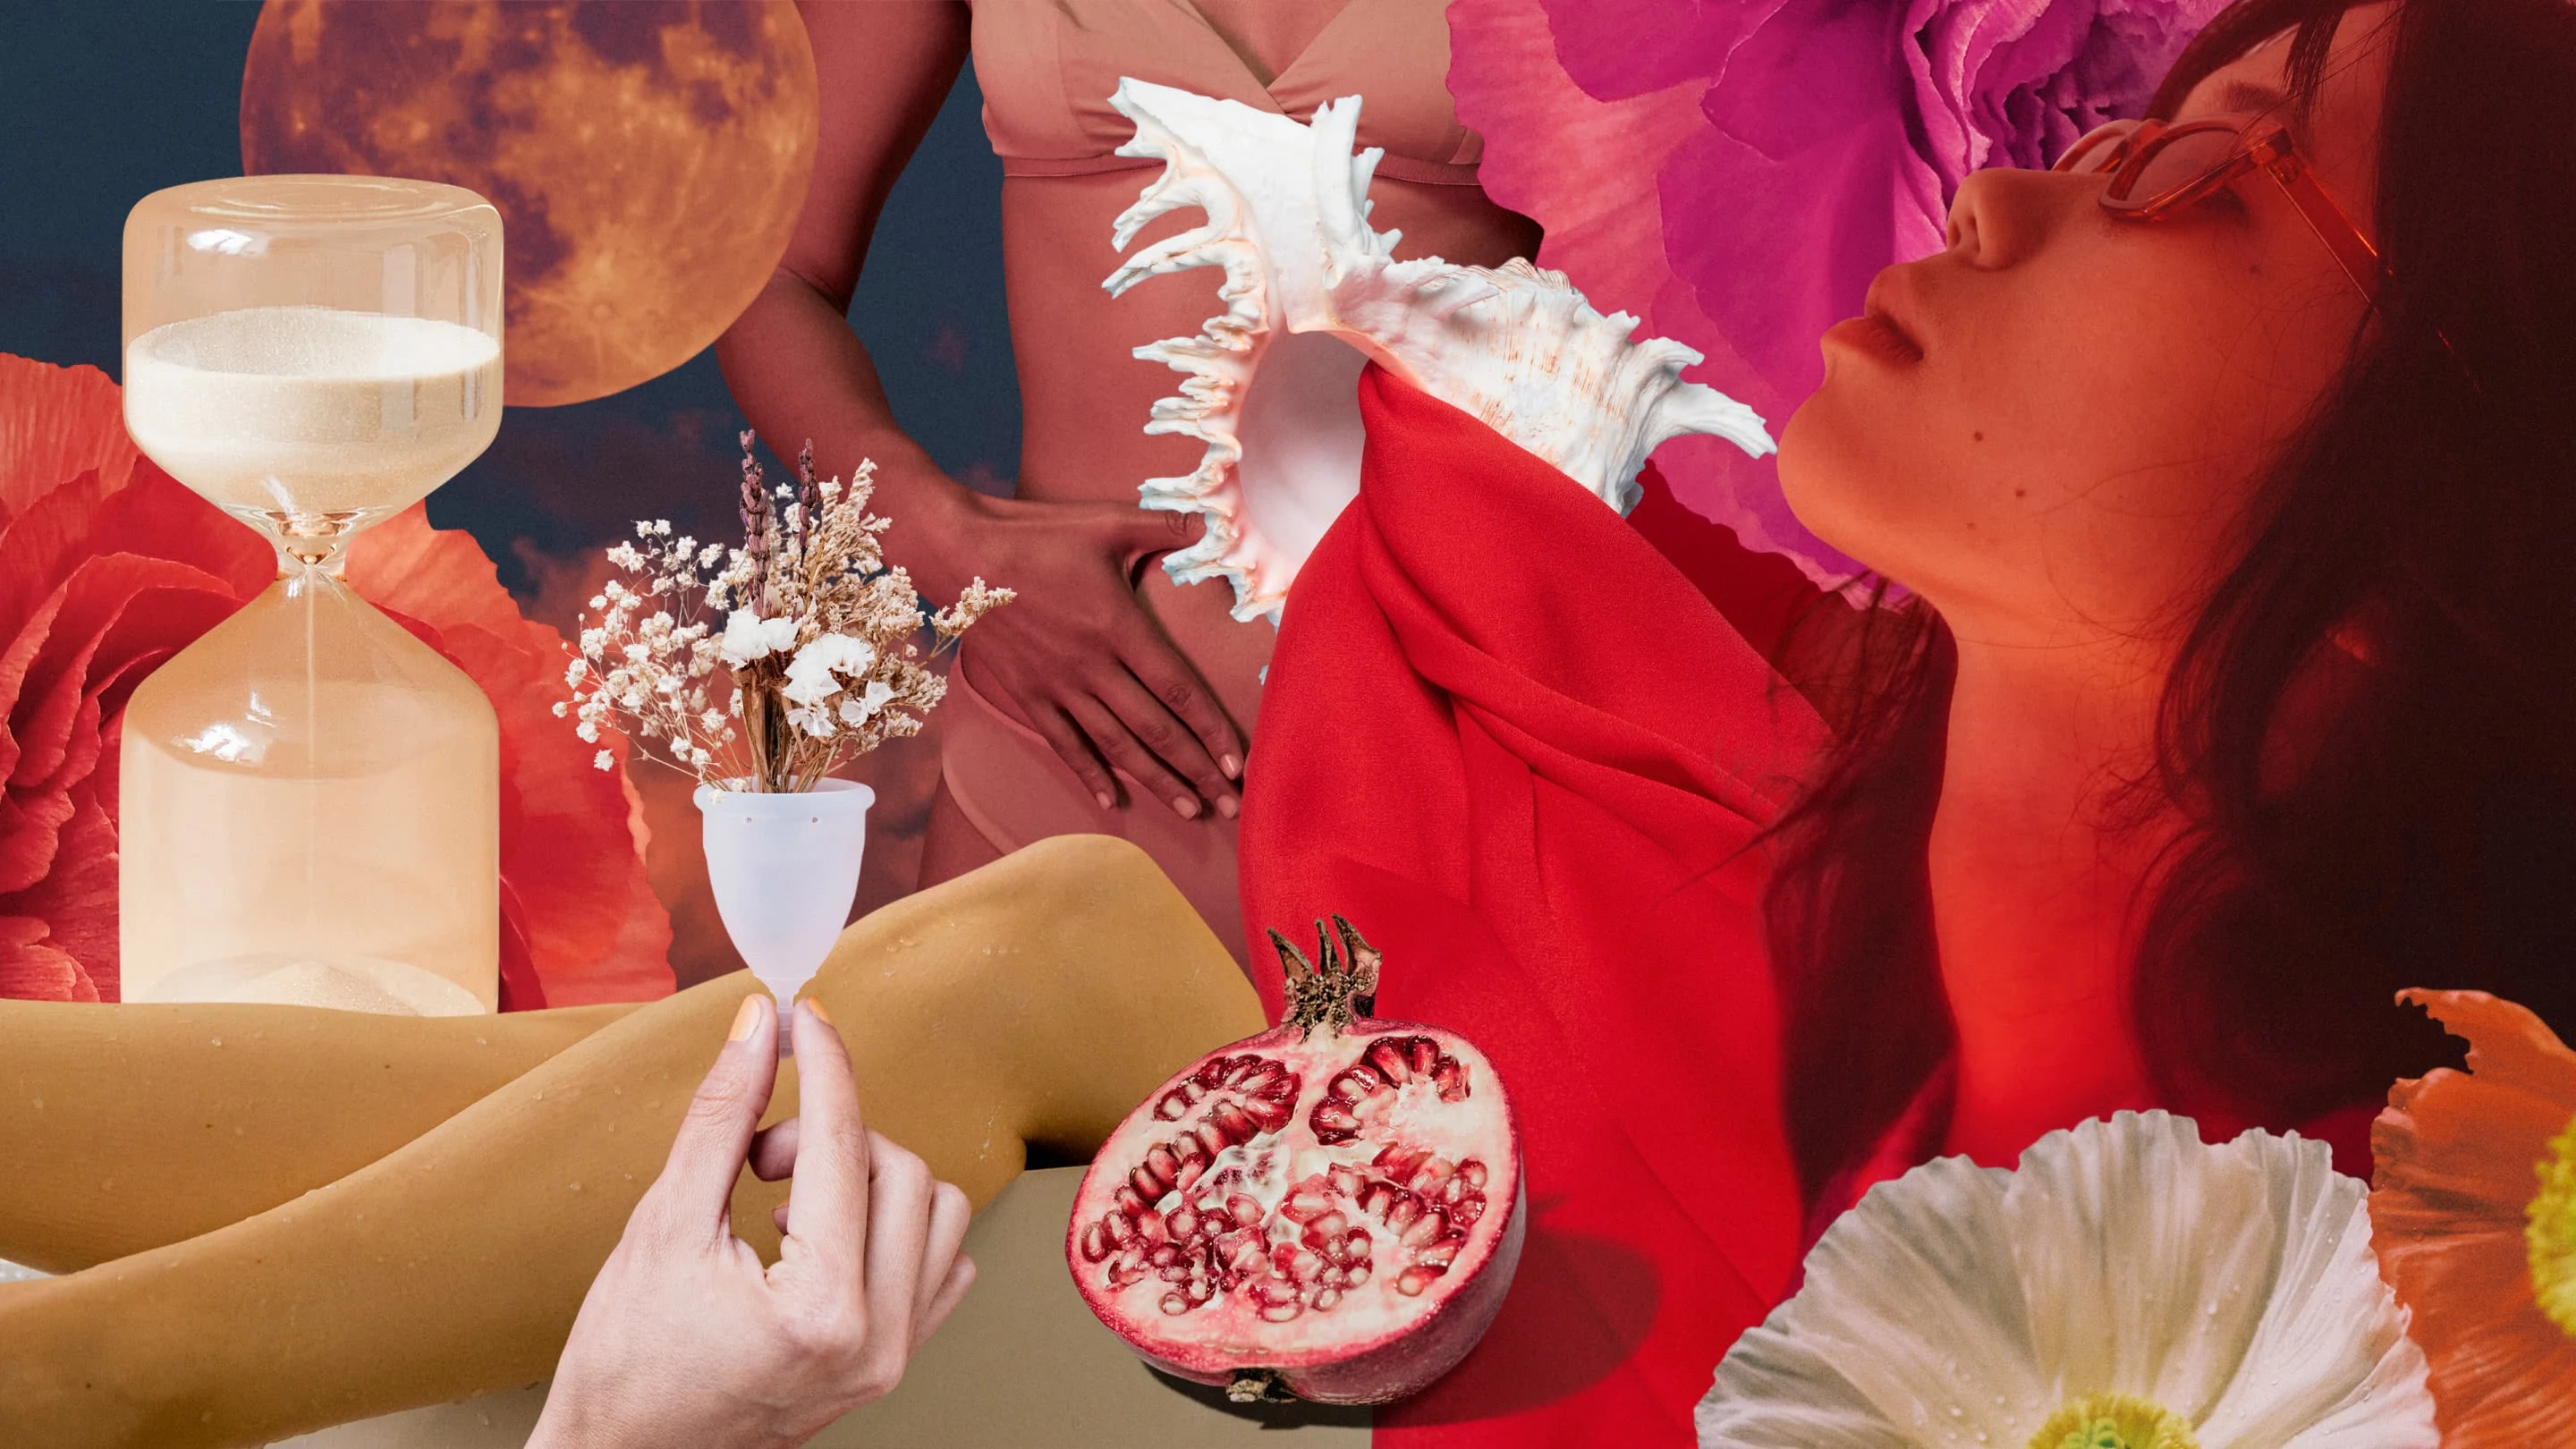 Colourful collage in shades of red. An East Asian woman wearing glasses leans her head back on the right. A hand holds a menstrual cup, containing a baby’s breath plant, beside an open pomegranate. A glowing red moon is on the upper left side..